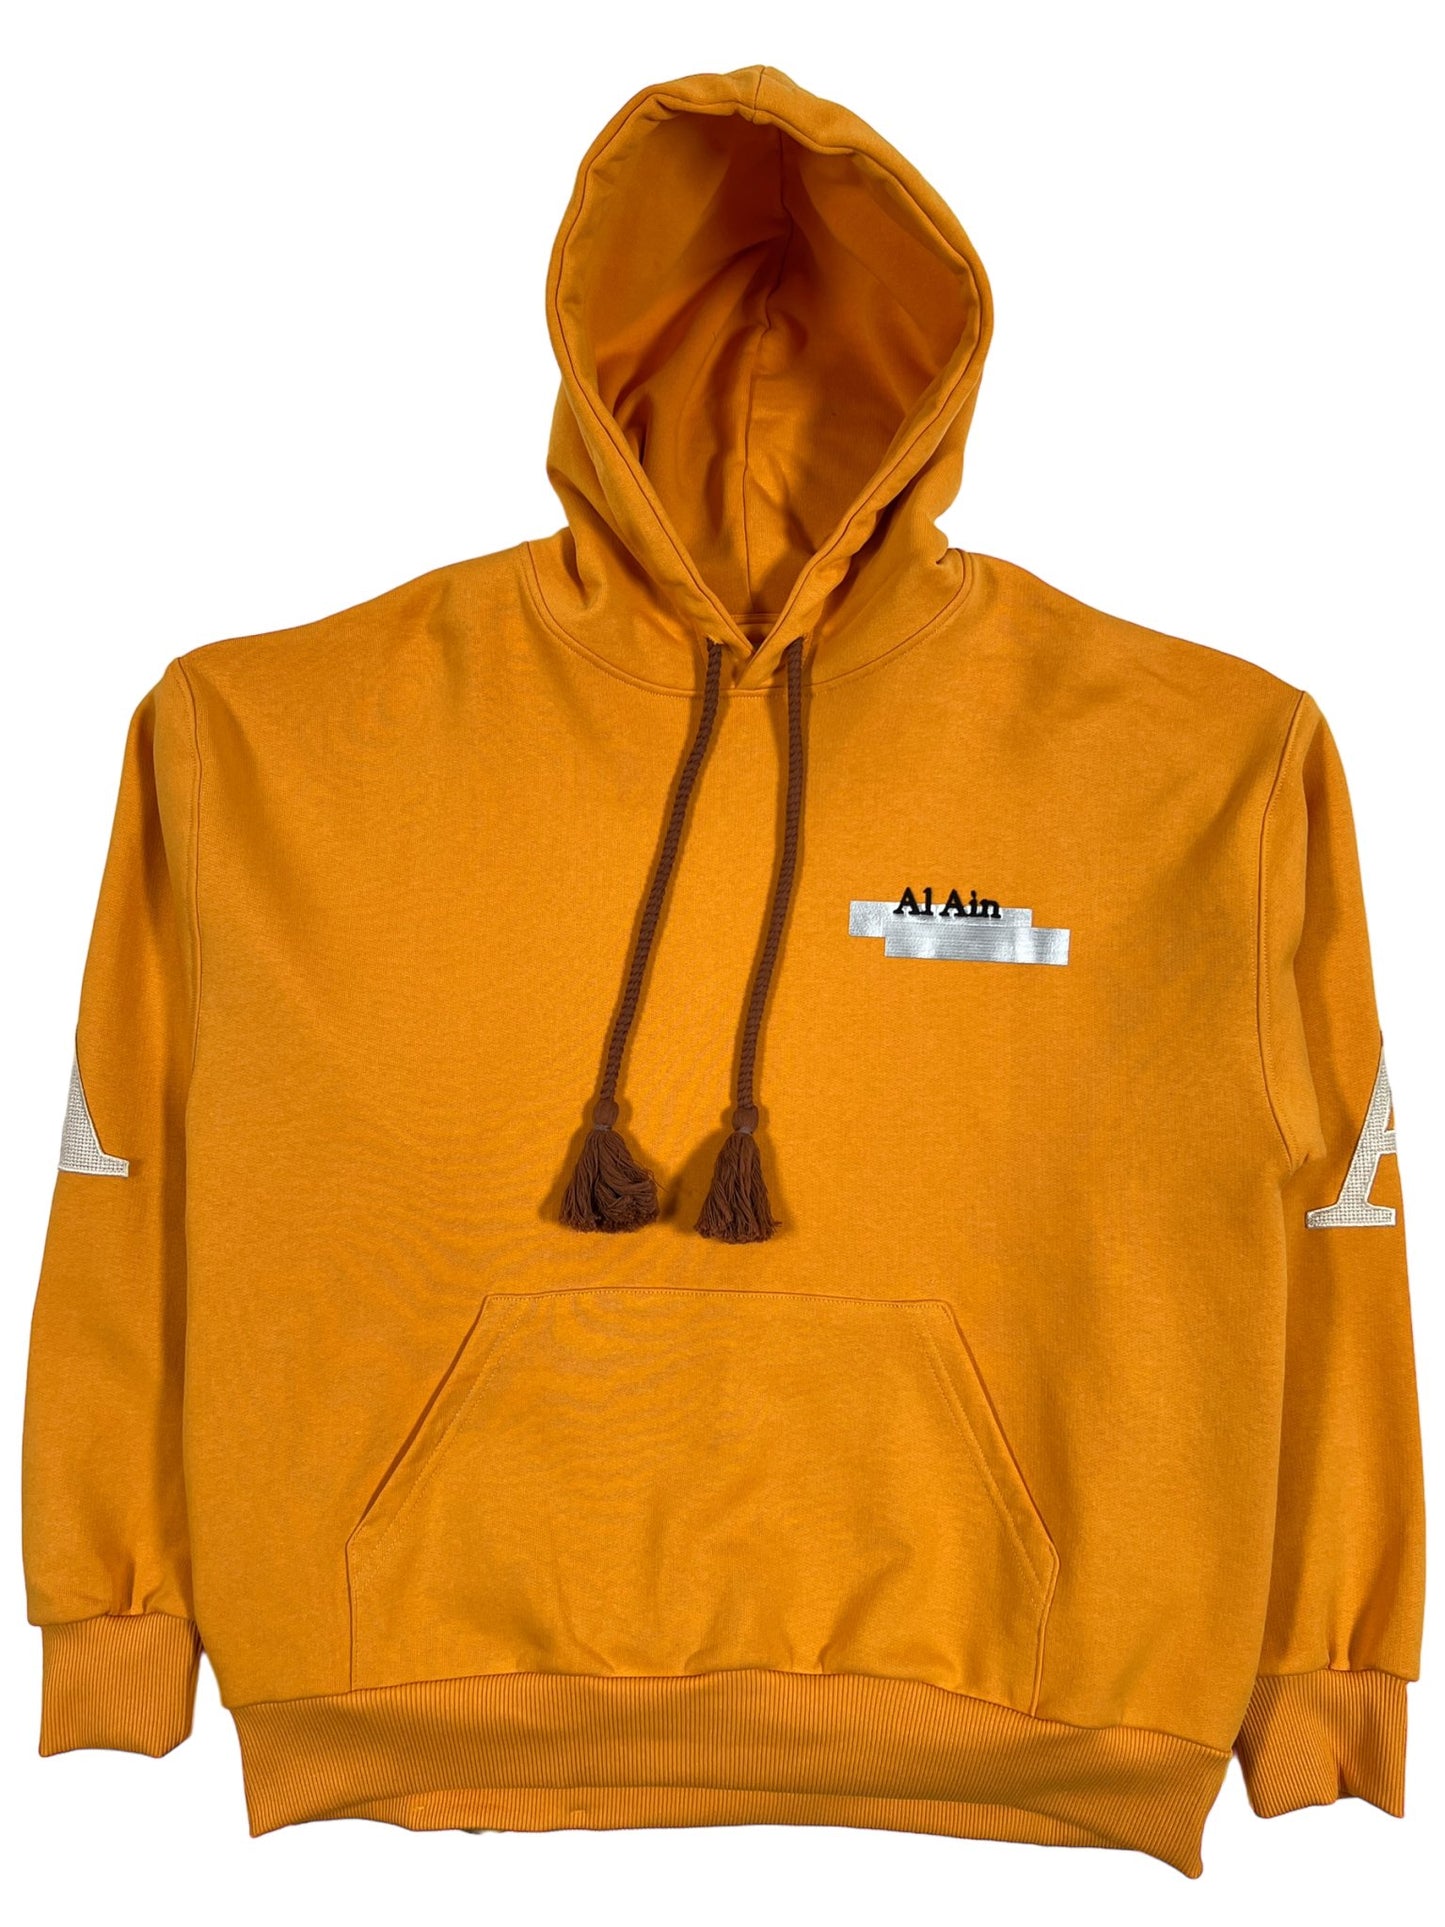 AL AIN ocre yellow hoodie with thick rope texture lace, a front pocket, and a logo patch on the left chest, displayed against a white background.